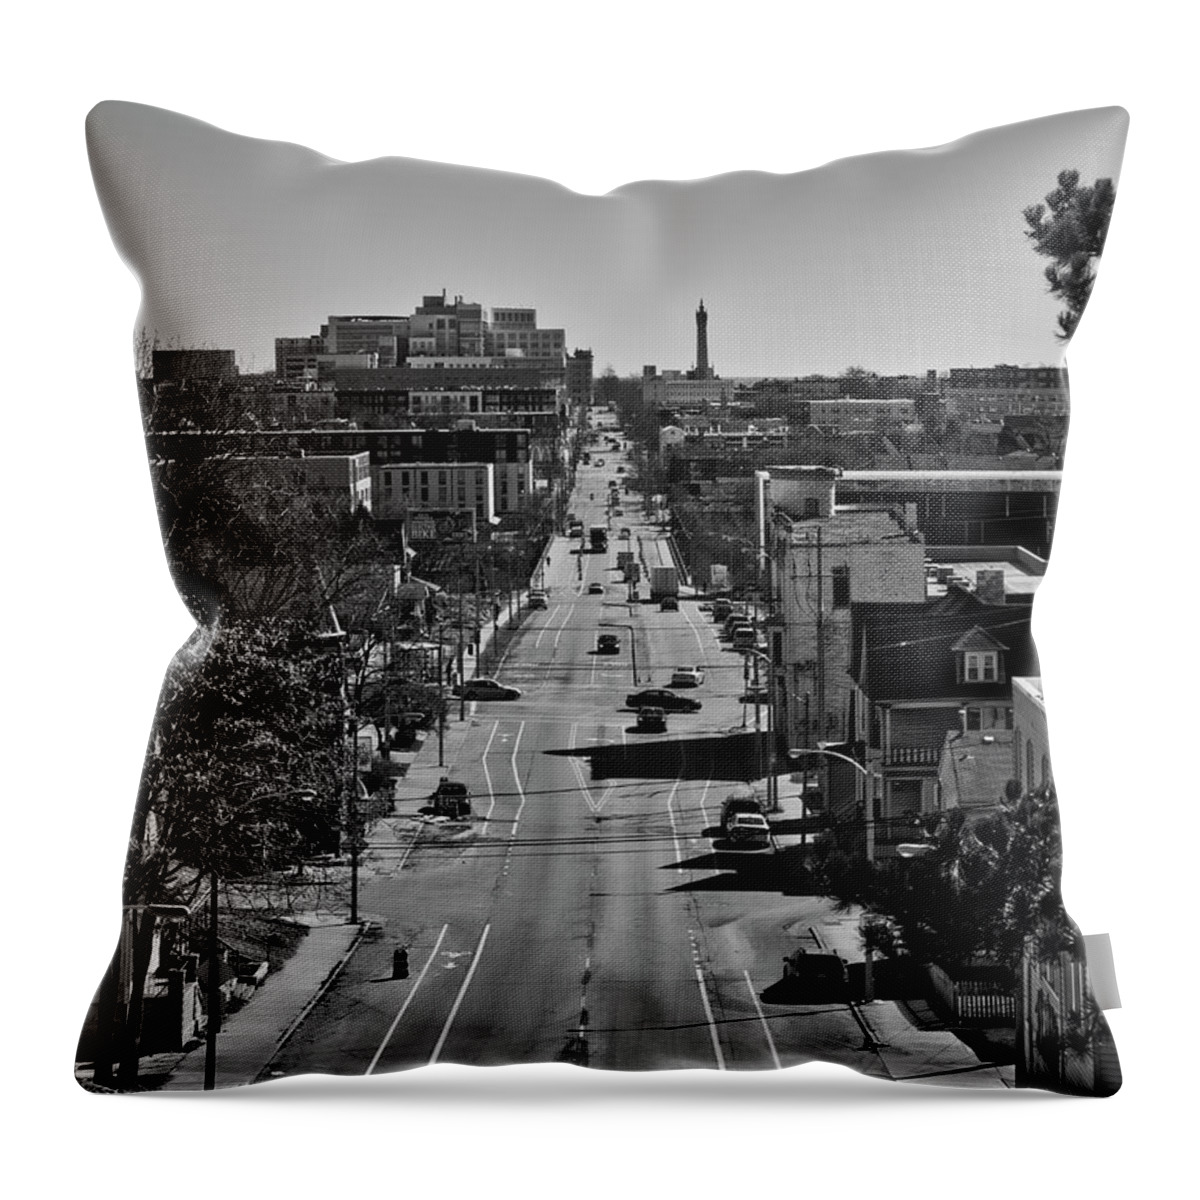 Milwukee Throw Pillow featuring the photograph North Avenue - Milwaukee - Wisconsin by Steven Ralser